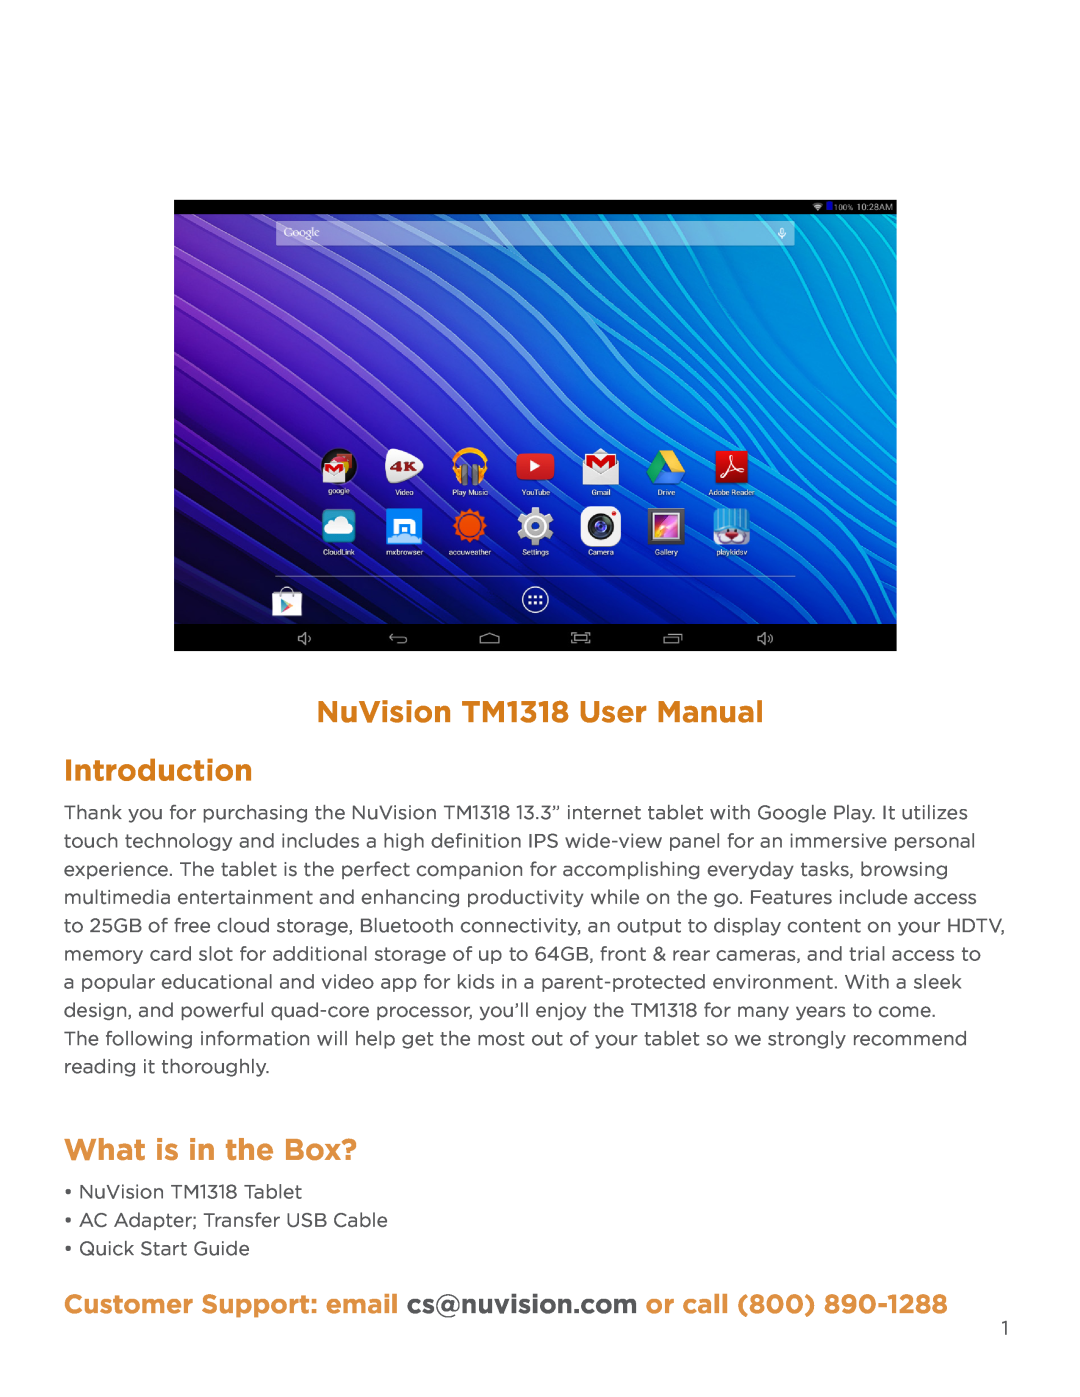 NuVision TM1218 user manual What is in the Box?, NuVision TM1318 User Manual Introduction 